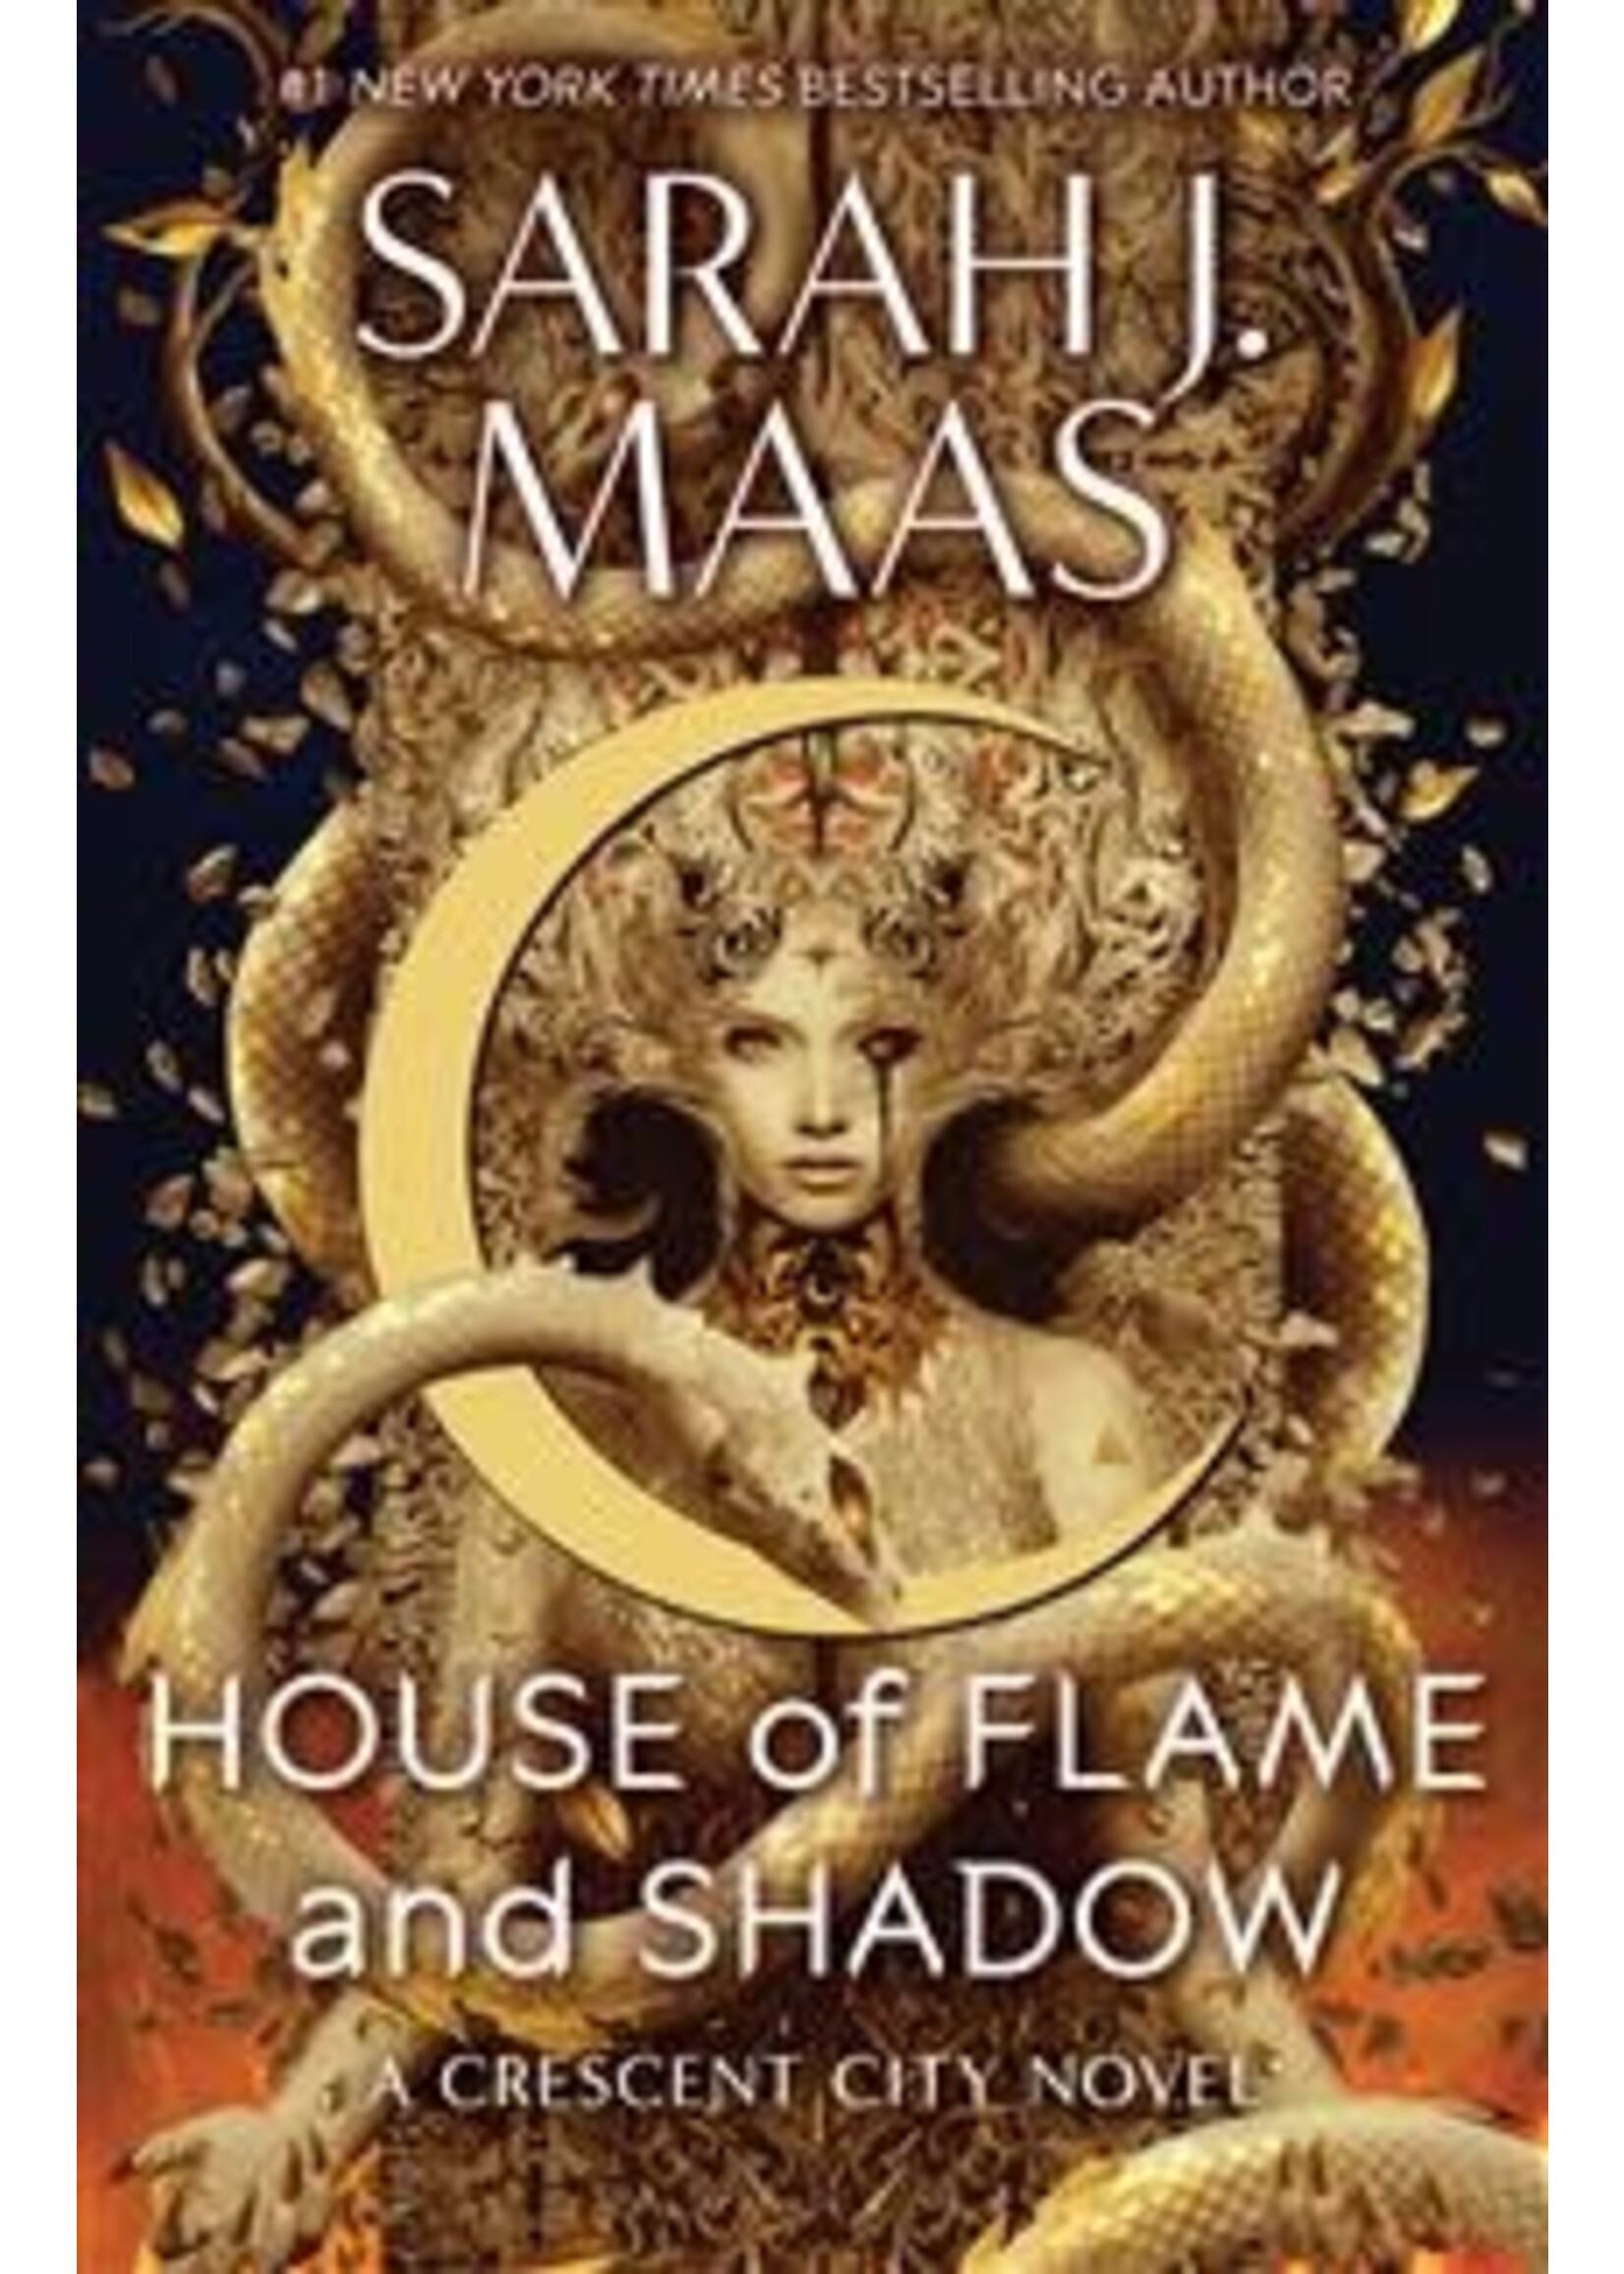 House of Flame and Shadow (Crescent City #3) by Sarah J. Maas